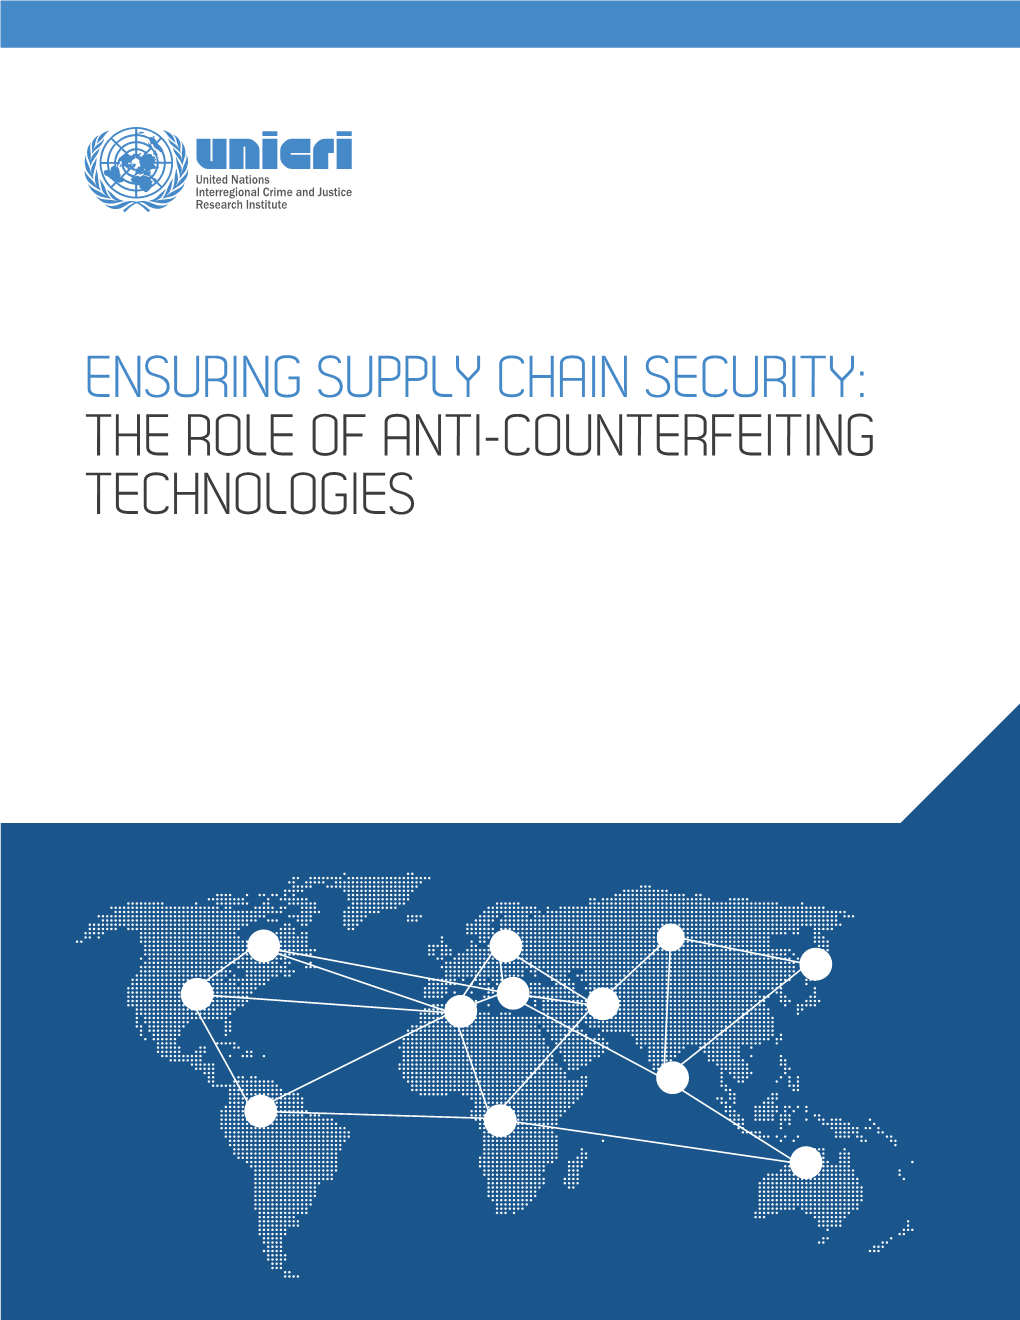 Ensuring Supply Chain Security.Pdf